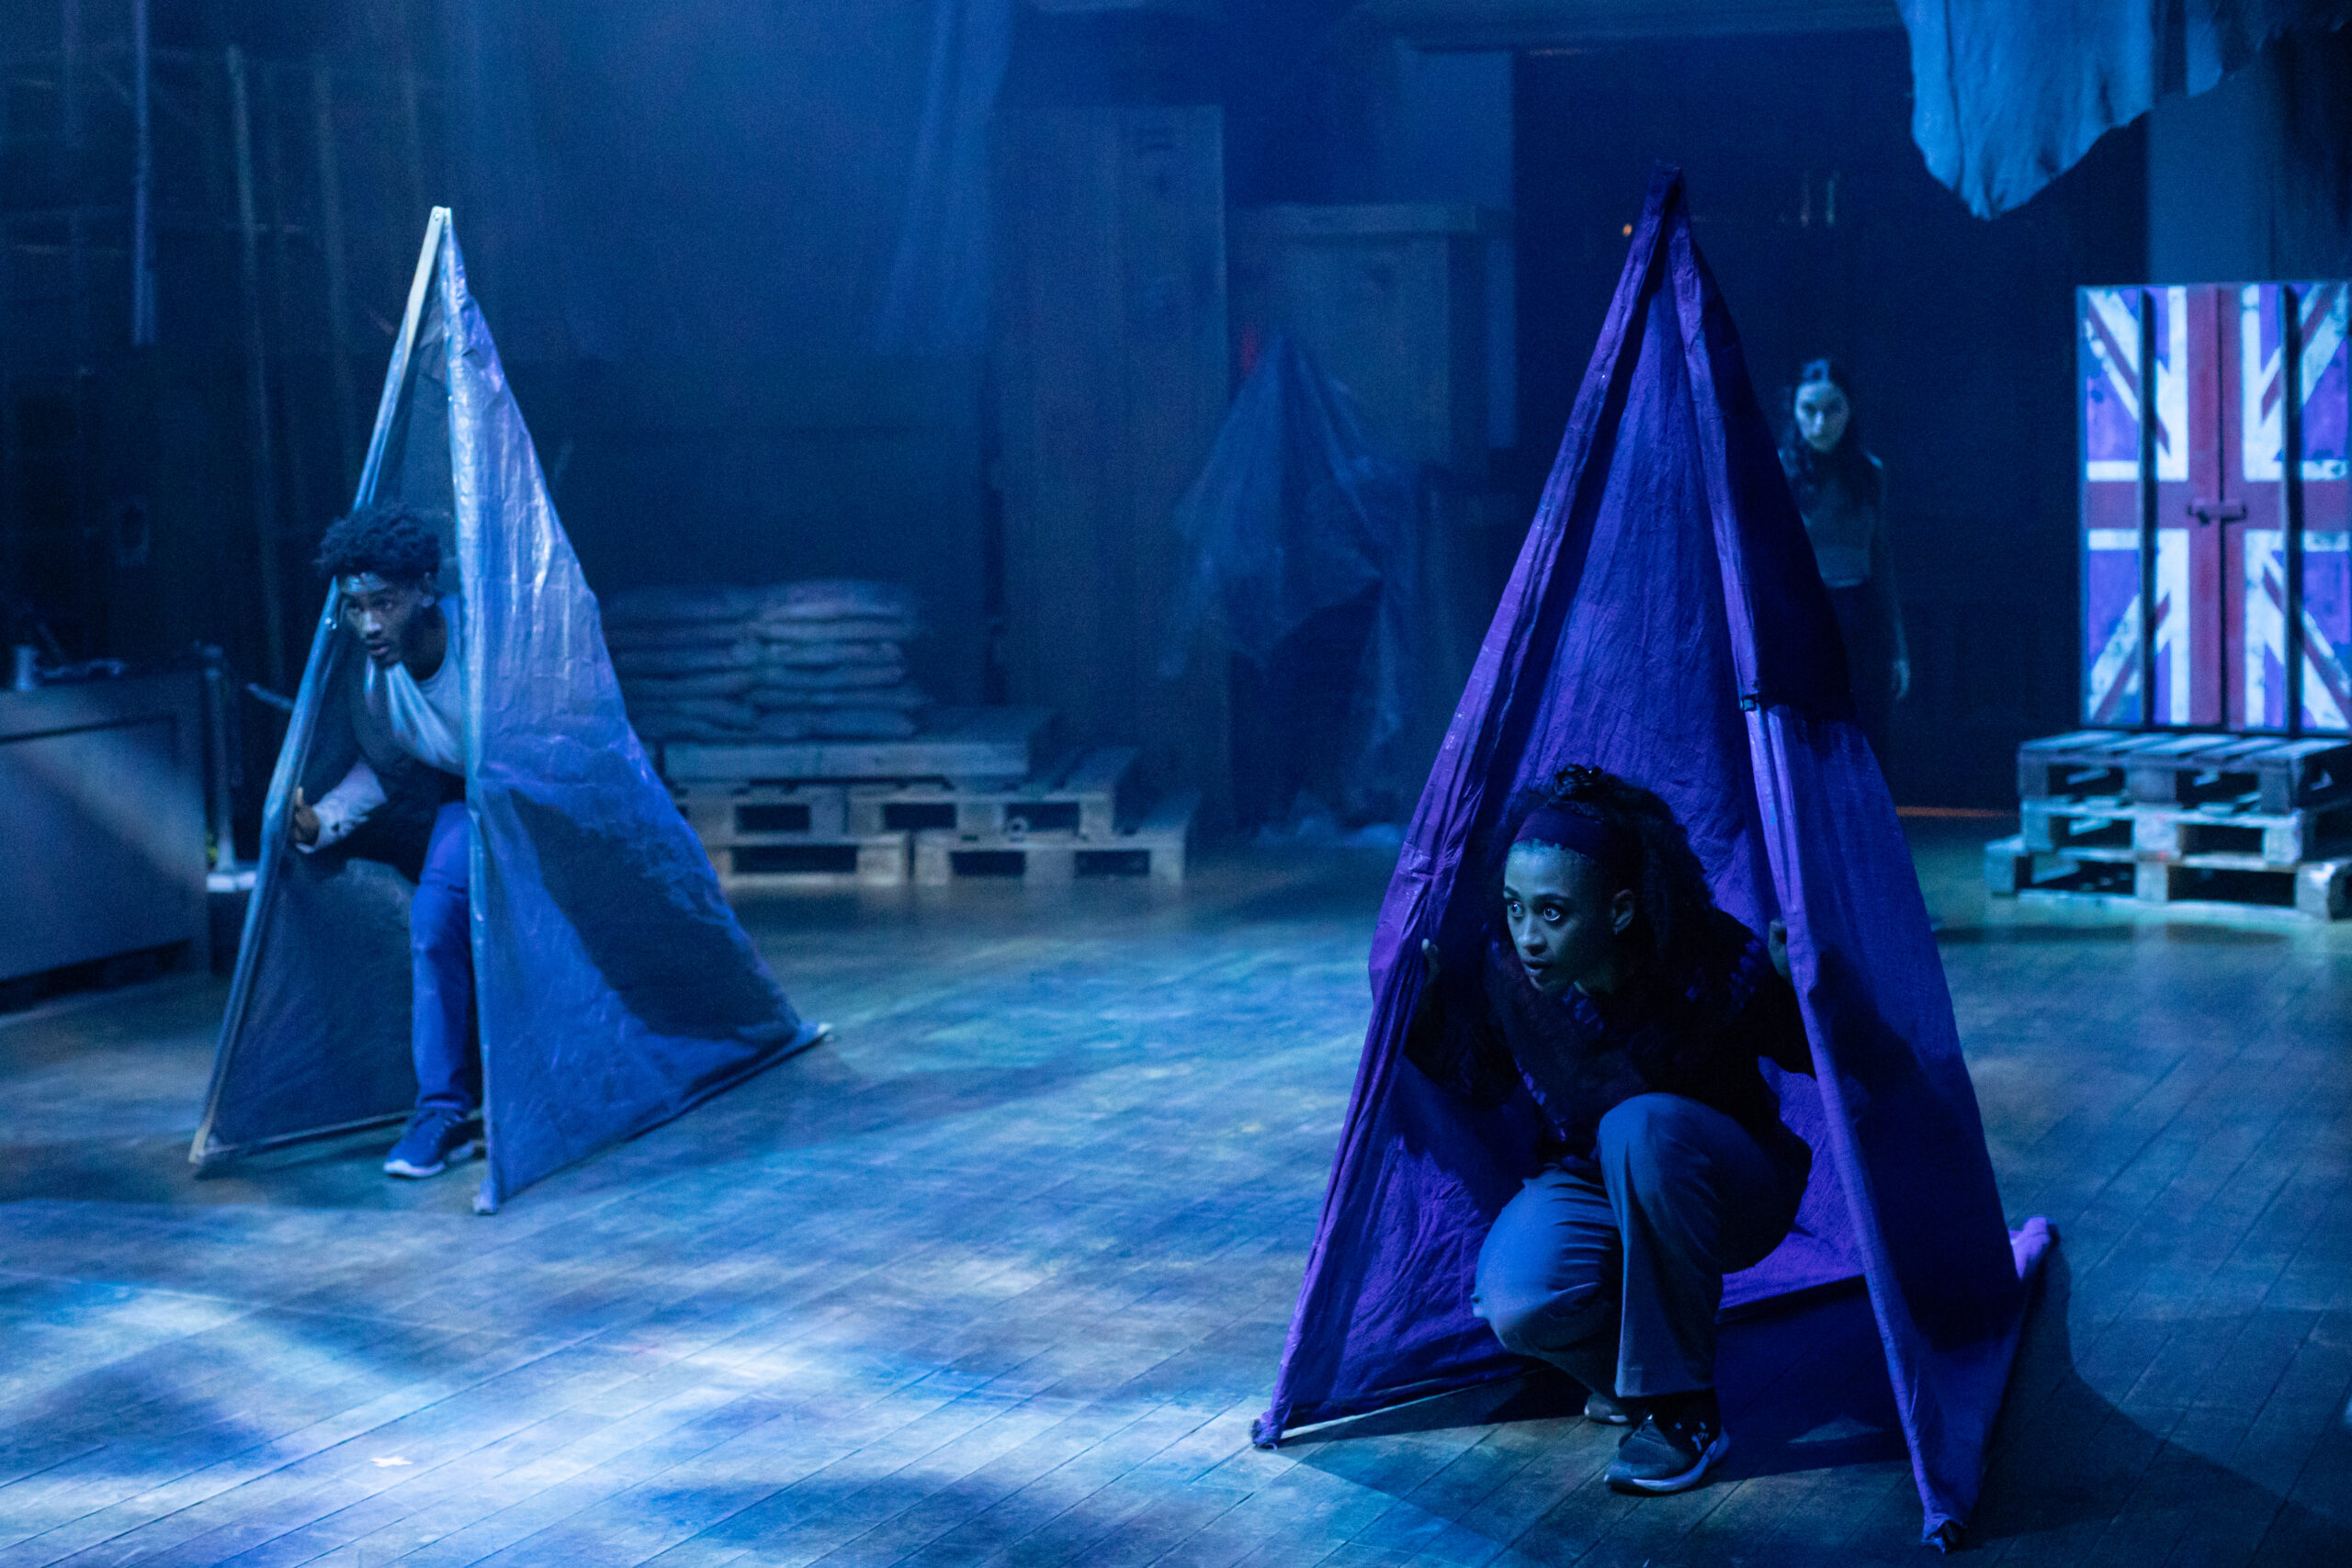 The scene is bathed in a blue light. There are two performers, crouching down inside tent like structures made from blue taurpaulin. in the background you can see a crate with doors painted with a Union Jack.